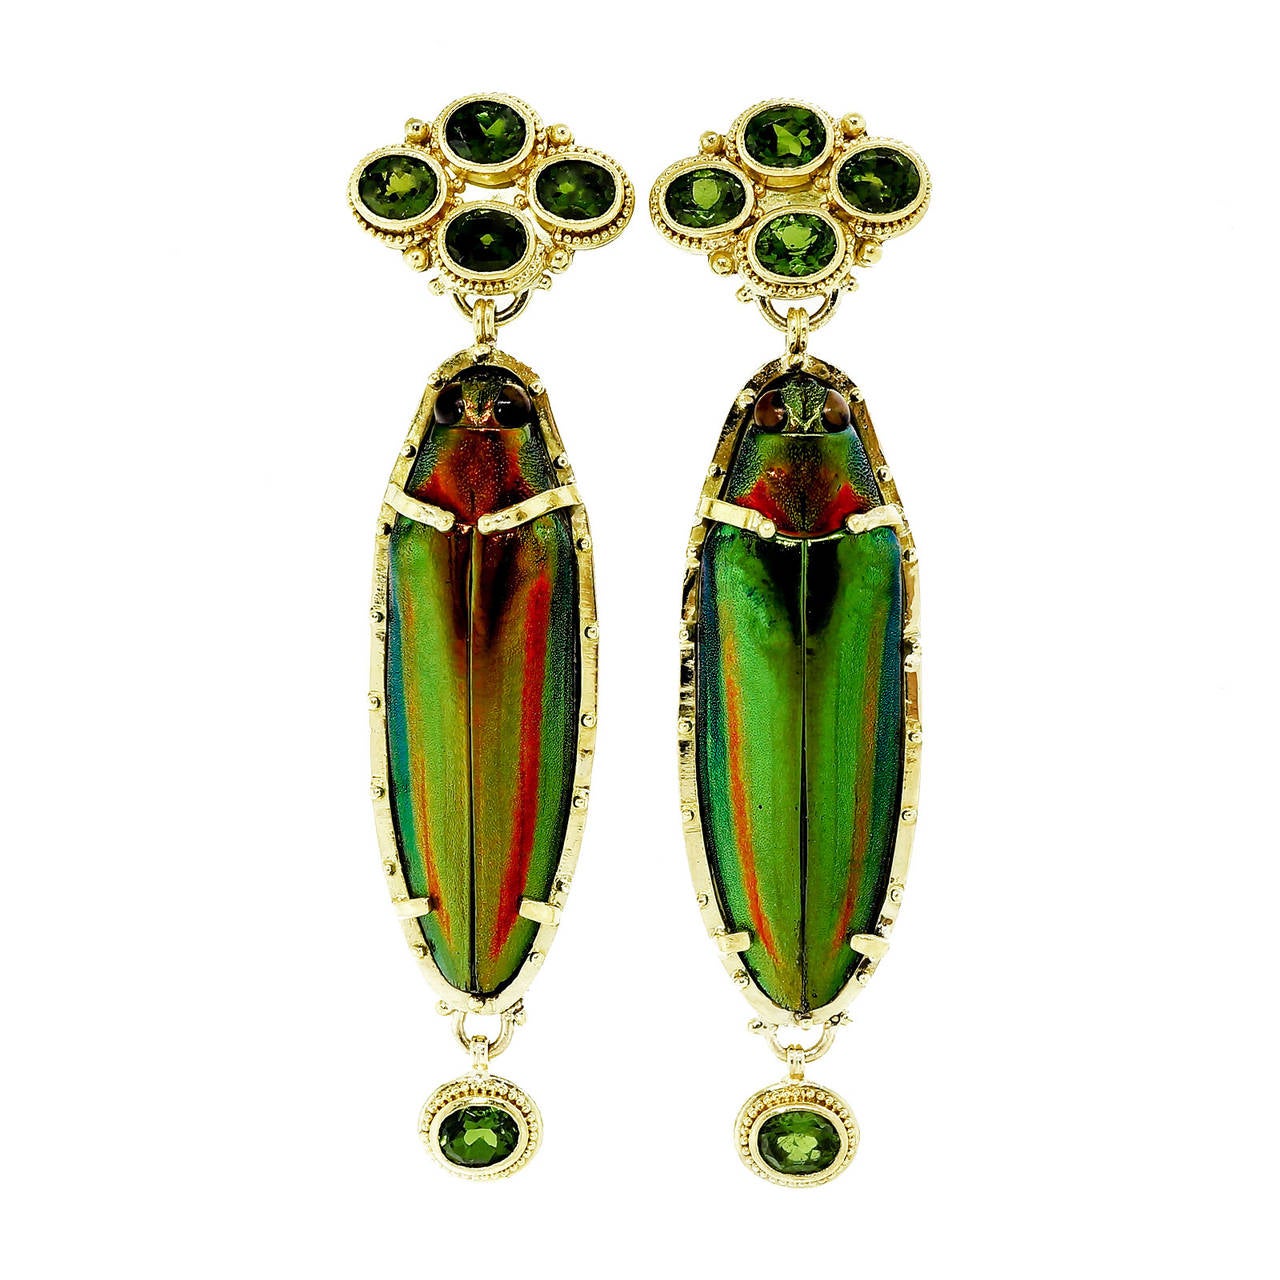 Totally handmade by the famous goldsmith Luna Felix. Granulated 22k and 18k yellow gold dangle earrings with rare bright green scarabs and gem green Tourmalines. Made and appraised by Luna Felix for $8,500.

8 gem bright green oval Tourmaline,